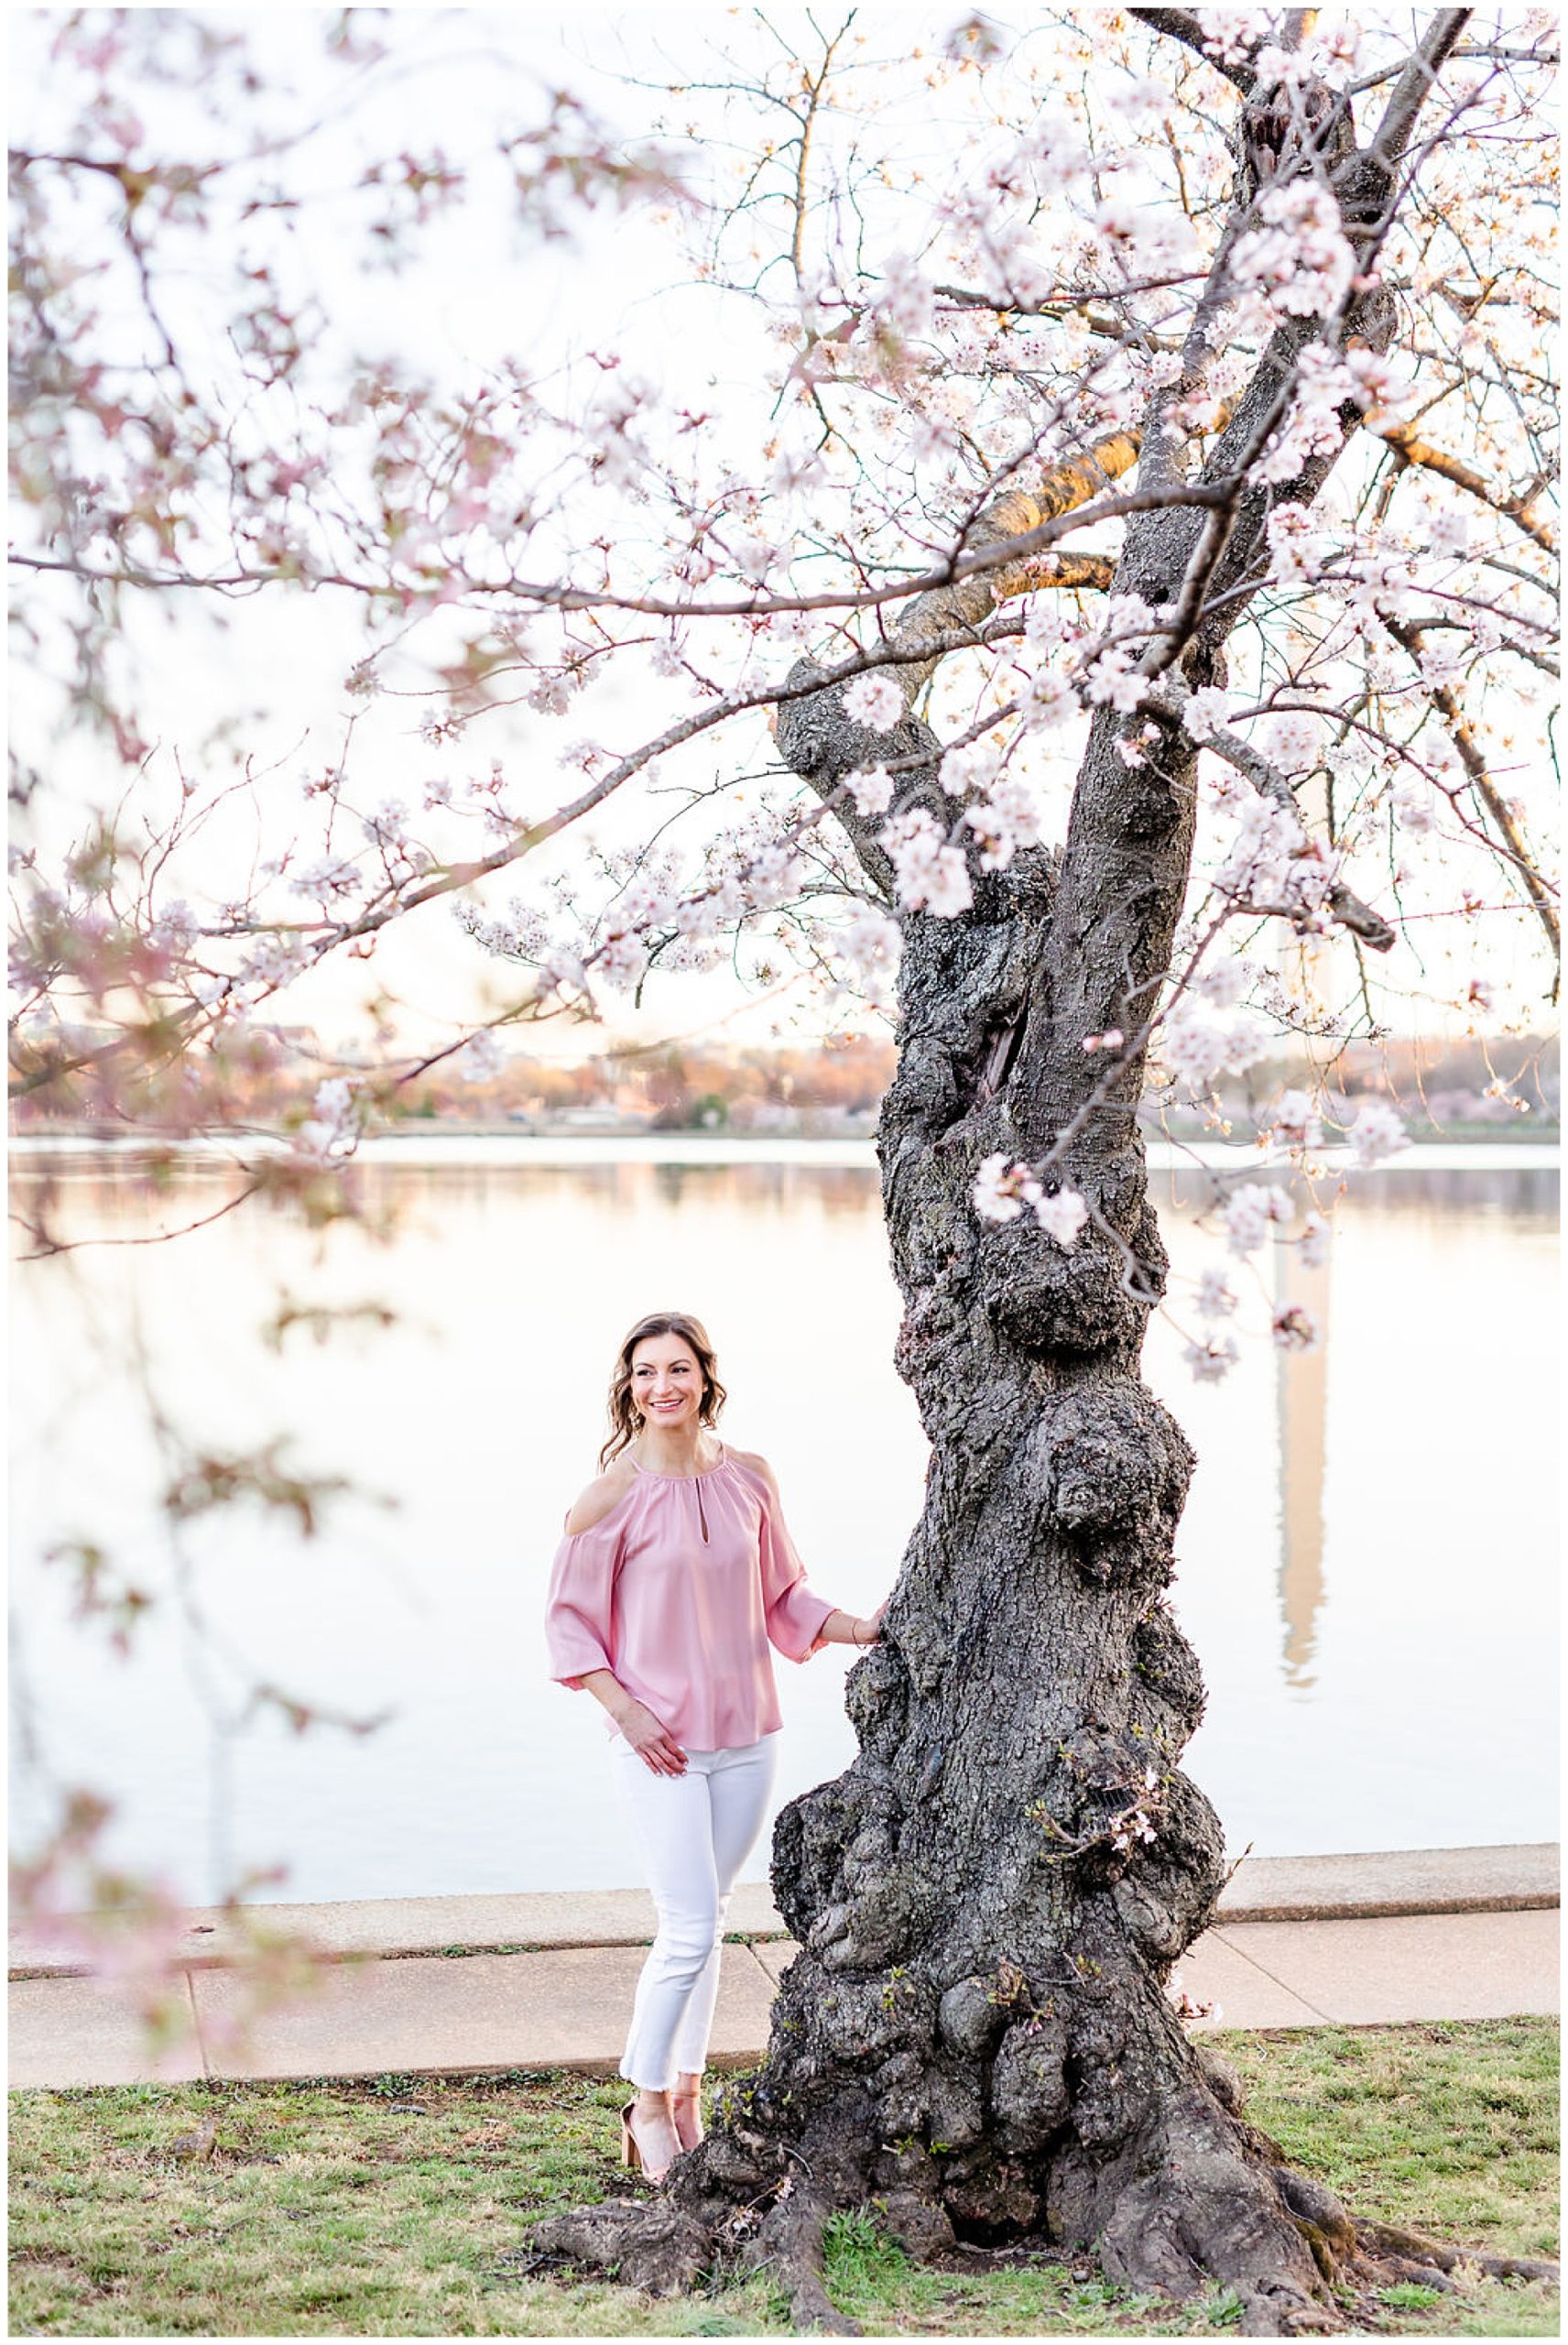 D.C. cherry blossoms headshots, cherry blossoms brand photos, DC peak bloom cherry blossoms, DC cherry blossoms photography, DC cherry blossoms photographer, DC cherry blossoms season, Rachel E.H. Photography, female headshots, woman with hand on tree, woman touching tree, white pants, pink blouse, cherry blossom tree, reflecting pool